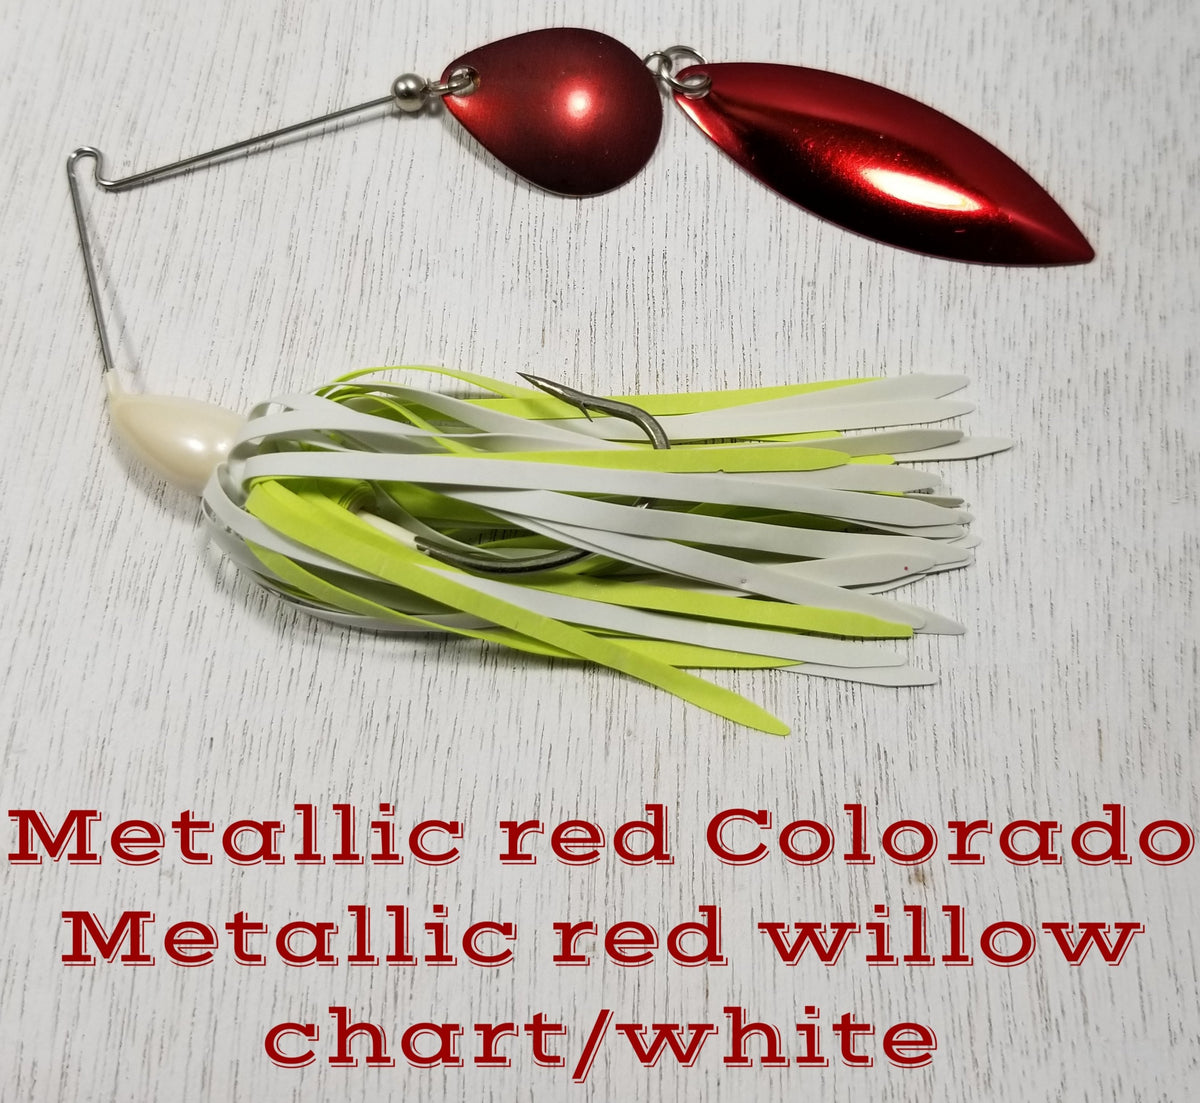 Humdinger red Colorado red willow - cht/wht